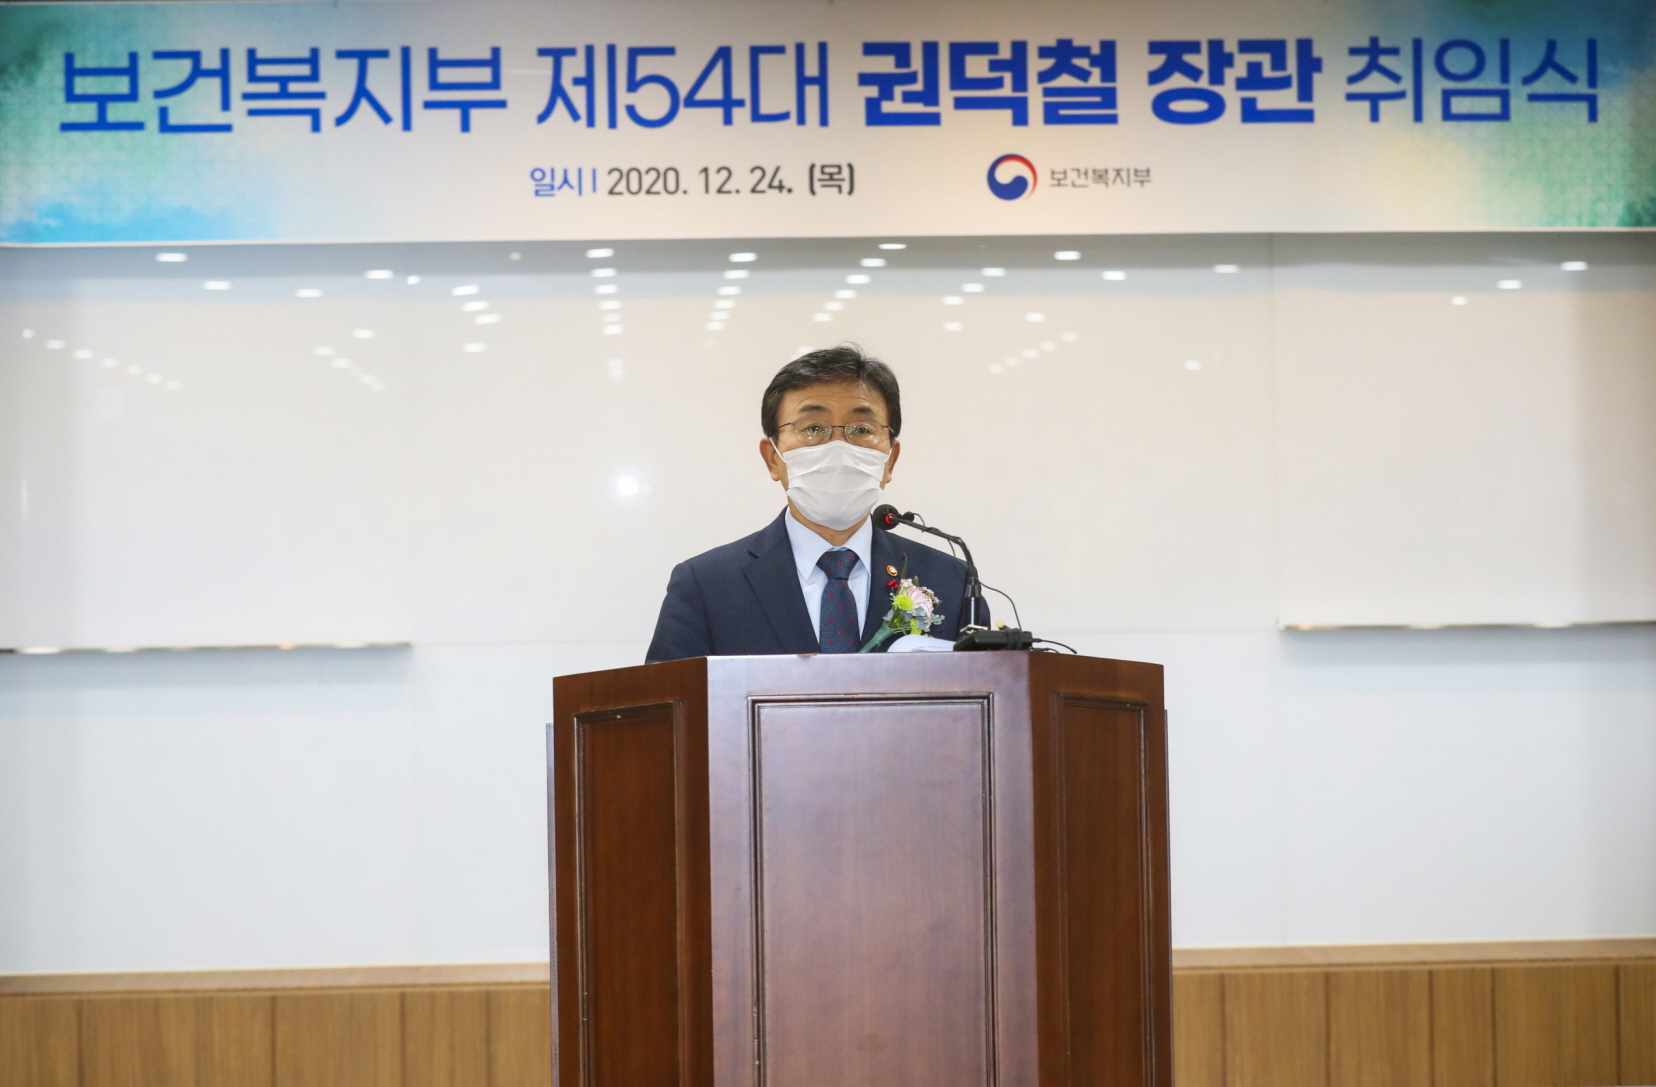 Mr. Kwon Deok-cheol Inaugurated as the 54th Minister of Health and Welfare (December 24) 사진8